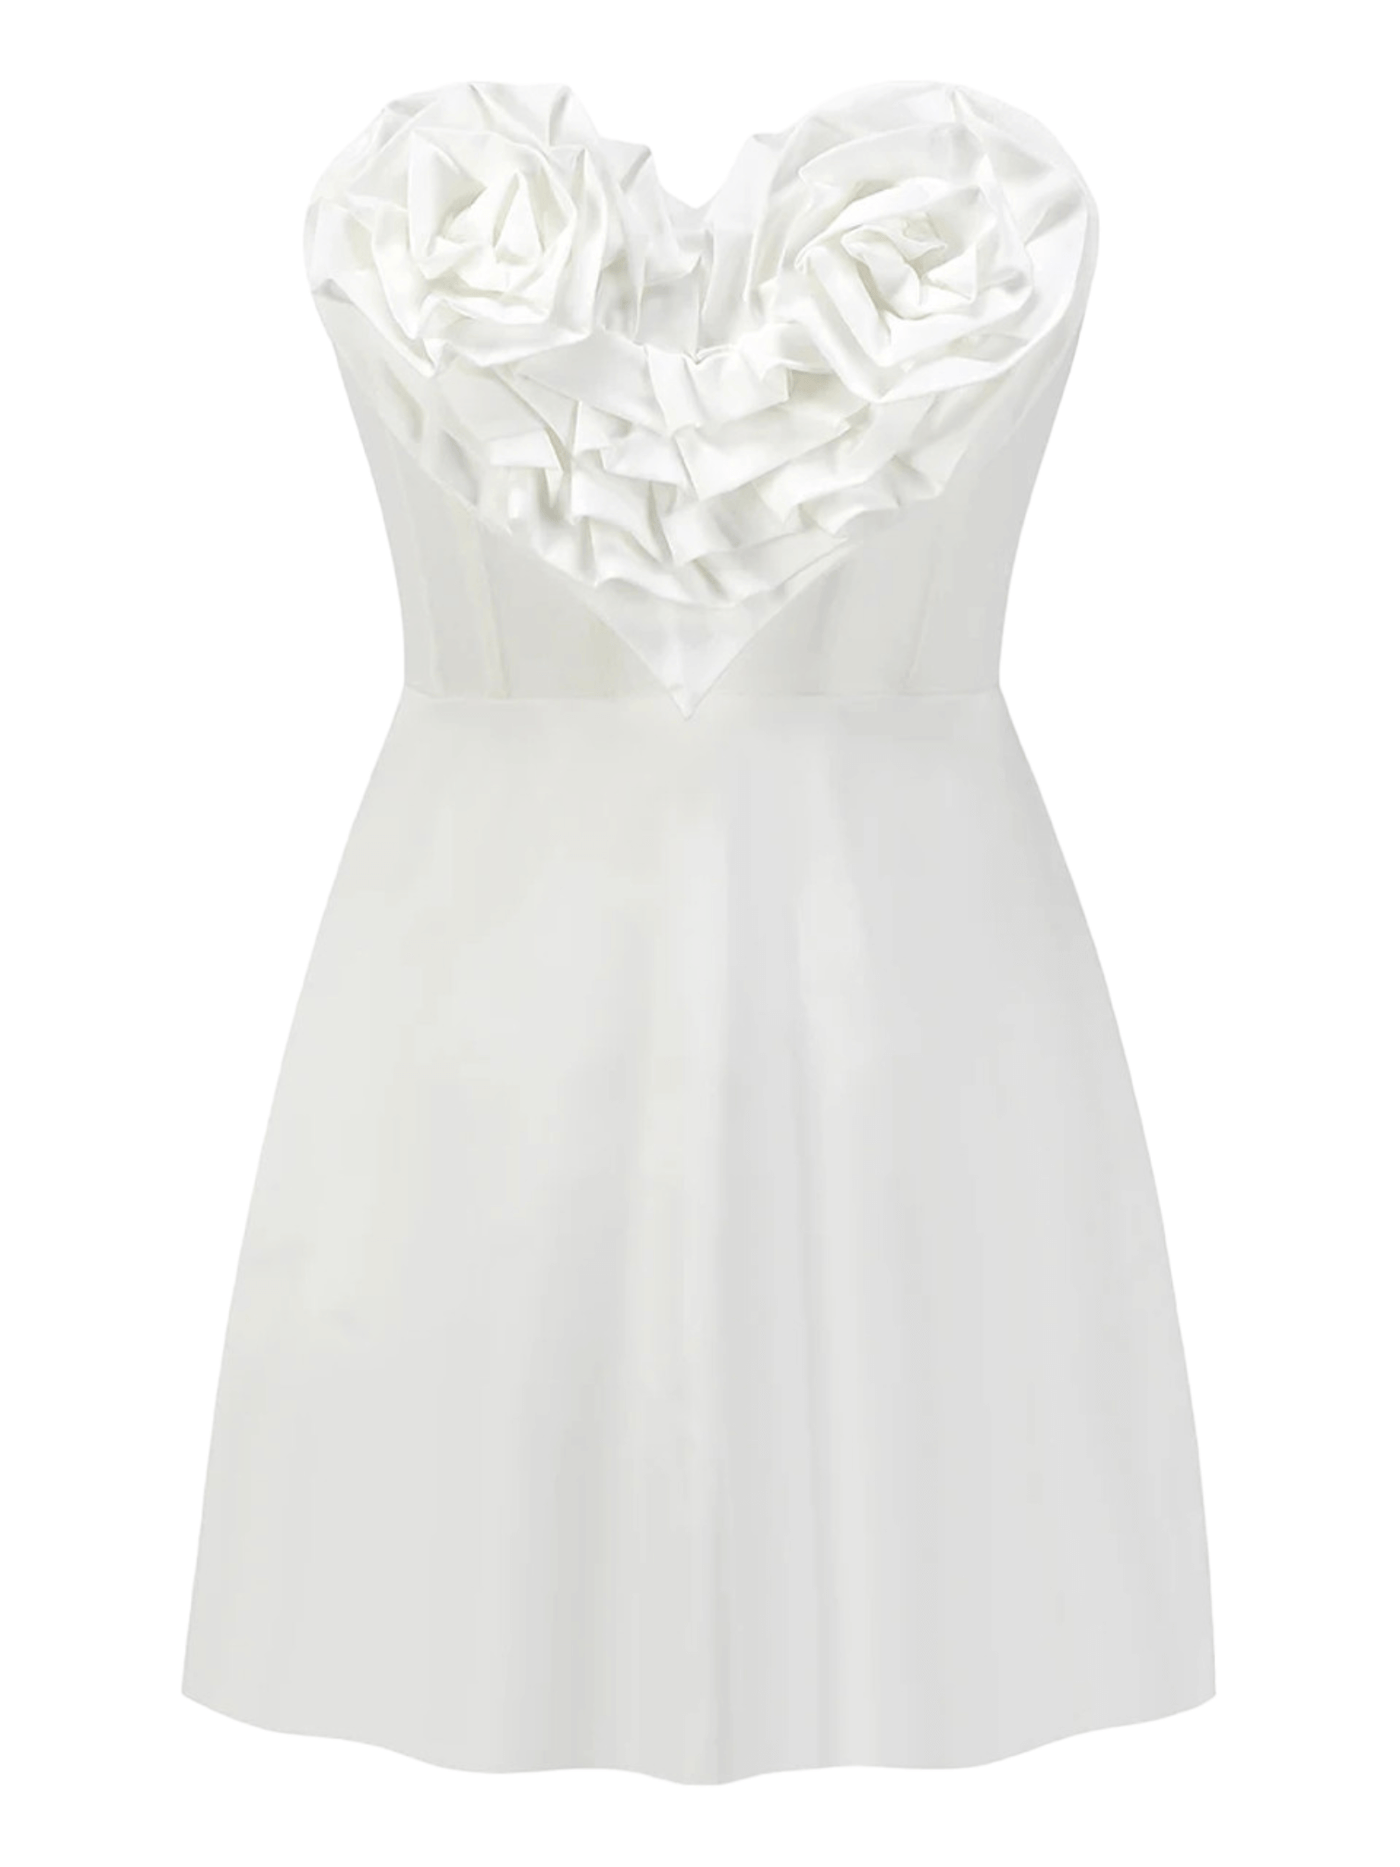 Floral Strapless A-Line Dress in White: Chic and Feminine Style for Any Occasion